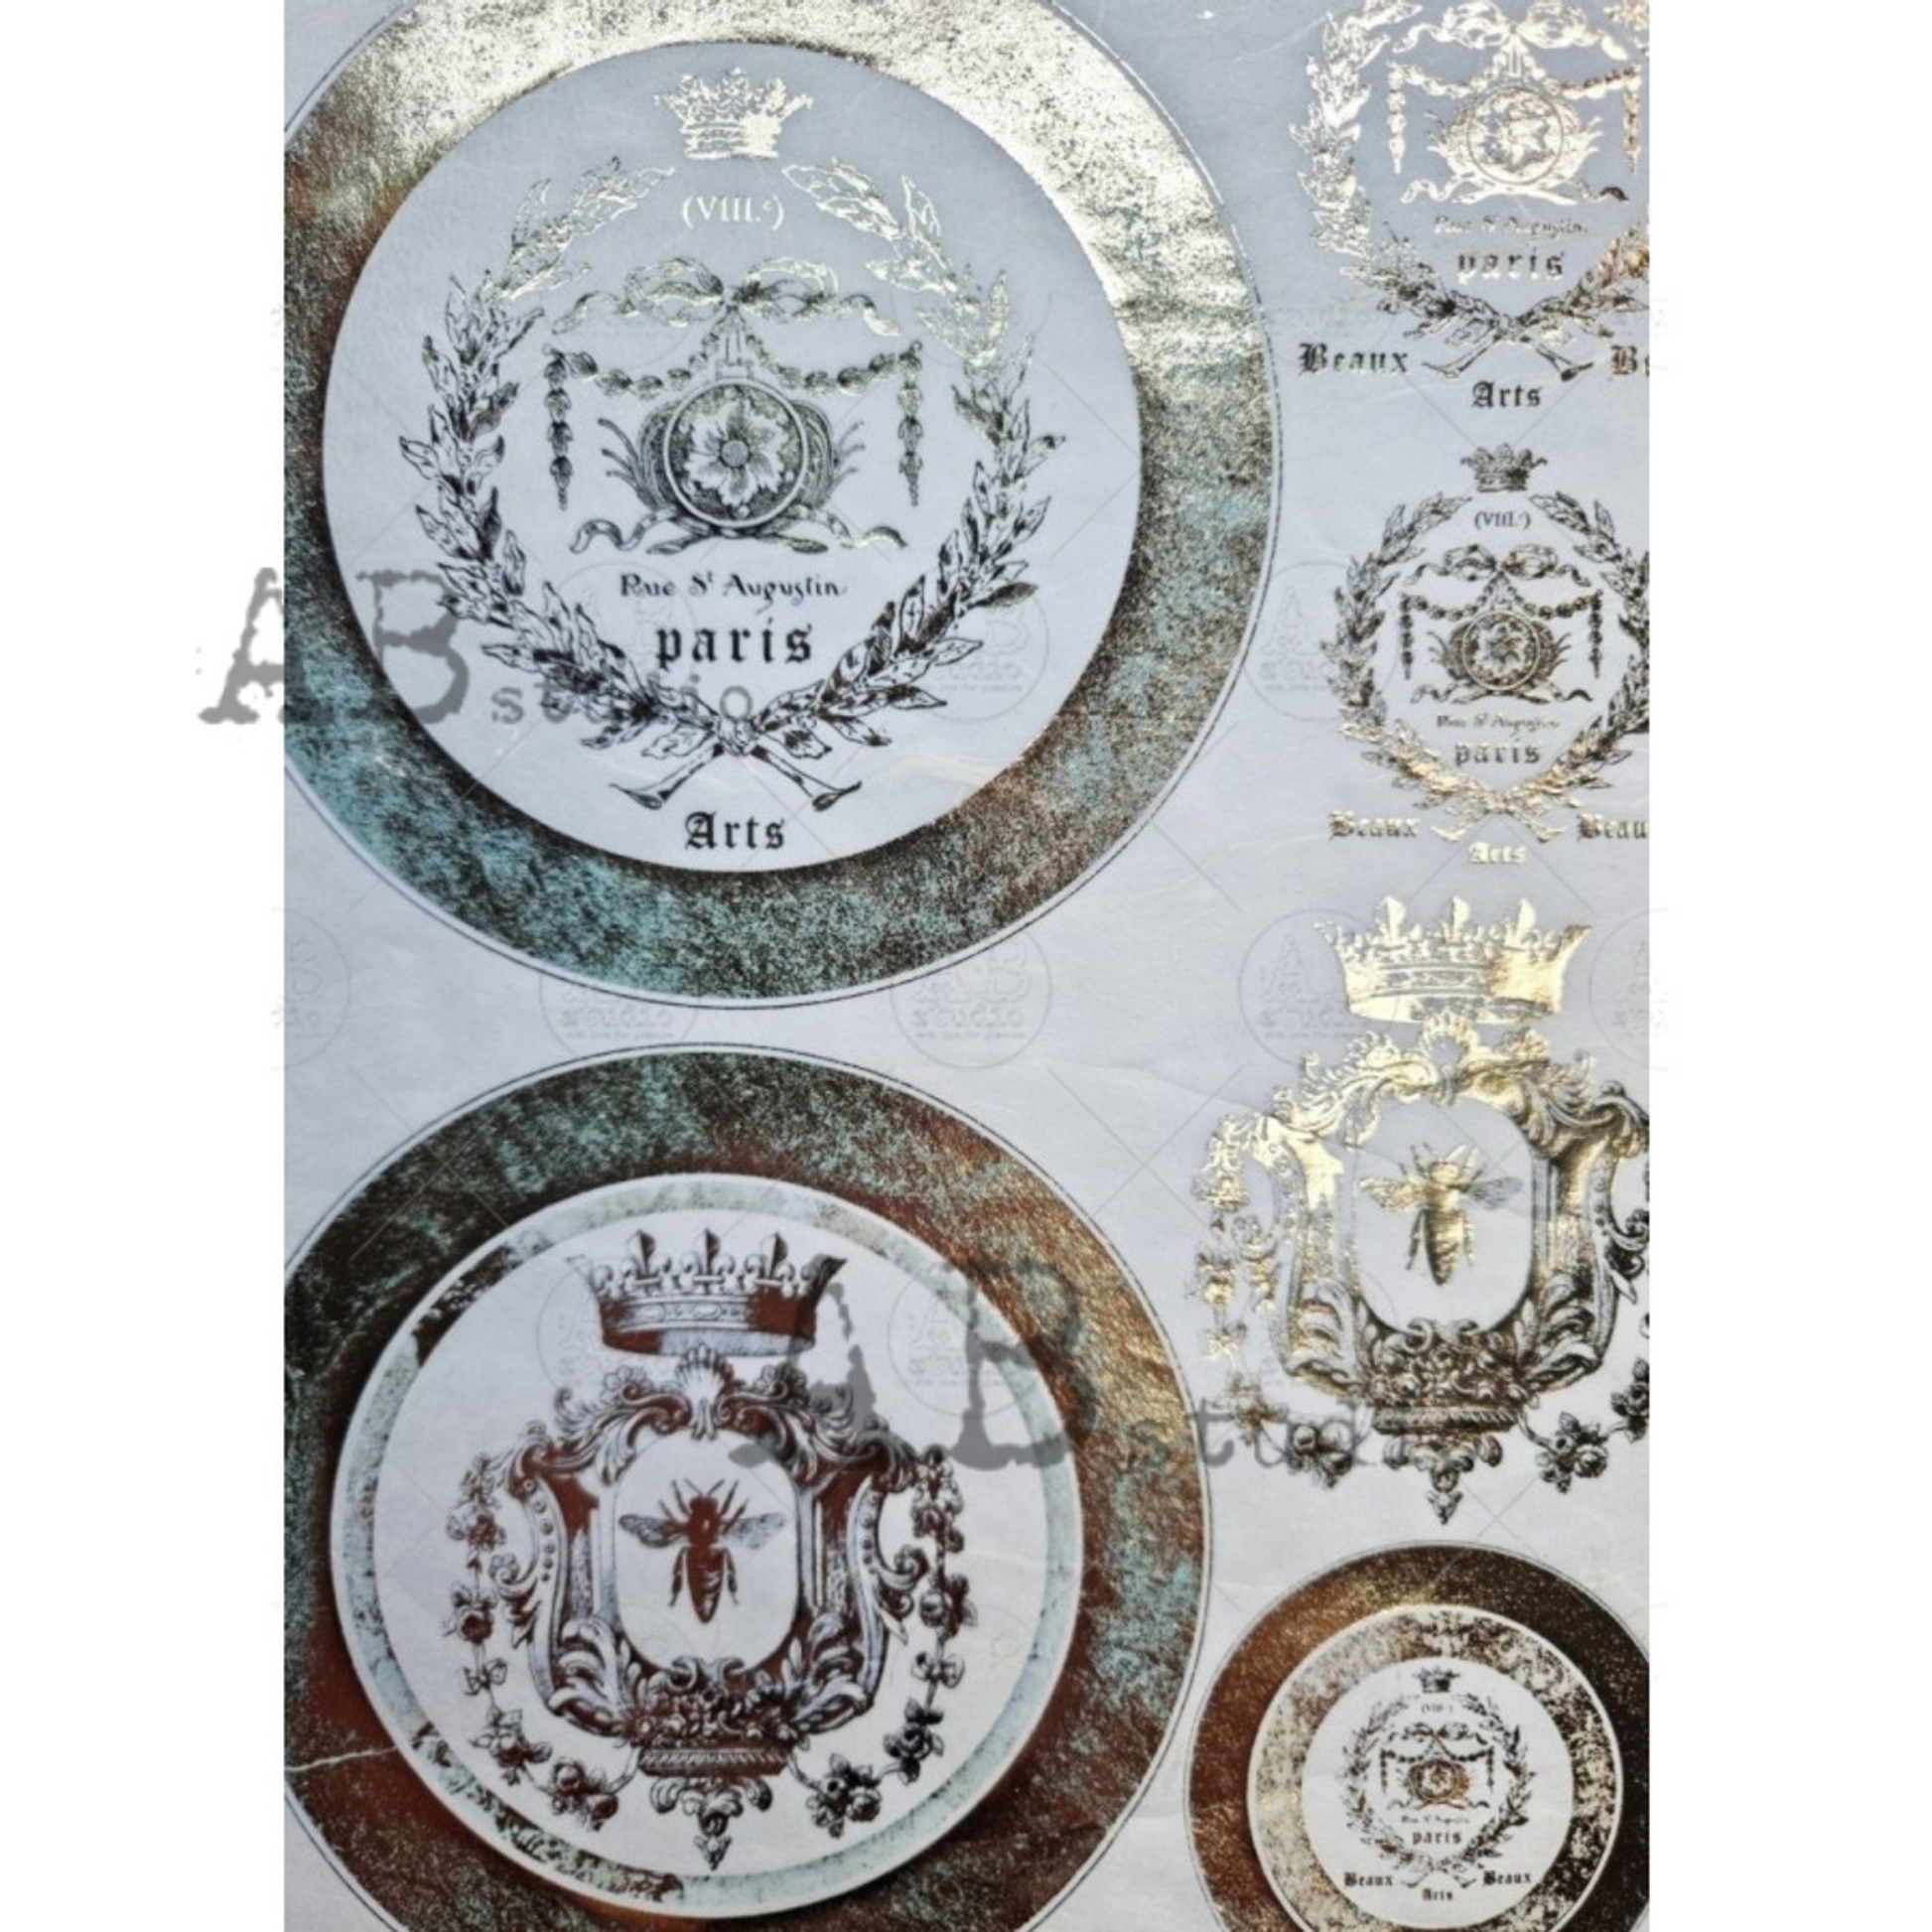 Gilded French Embelm Plates decoupage rice paper by AB Studio. Size A4 available at Milton's Daughter.